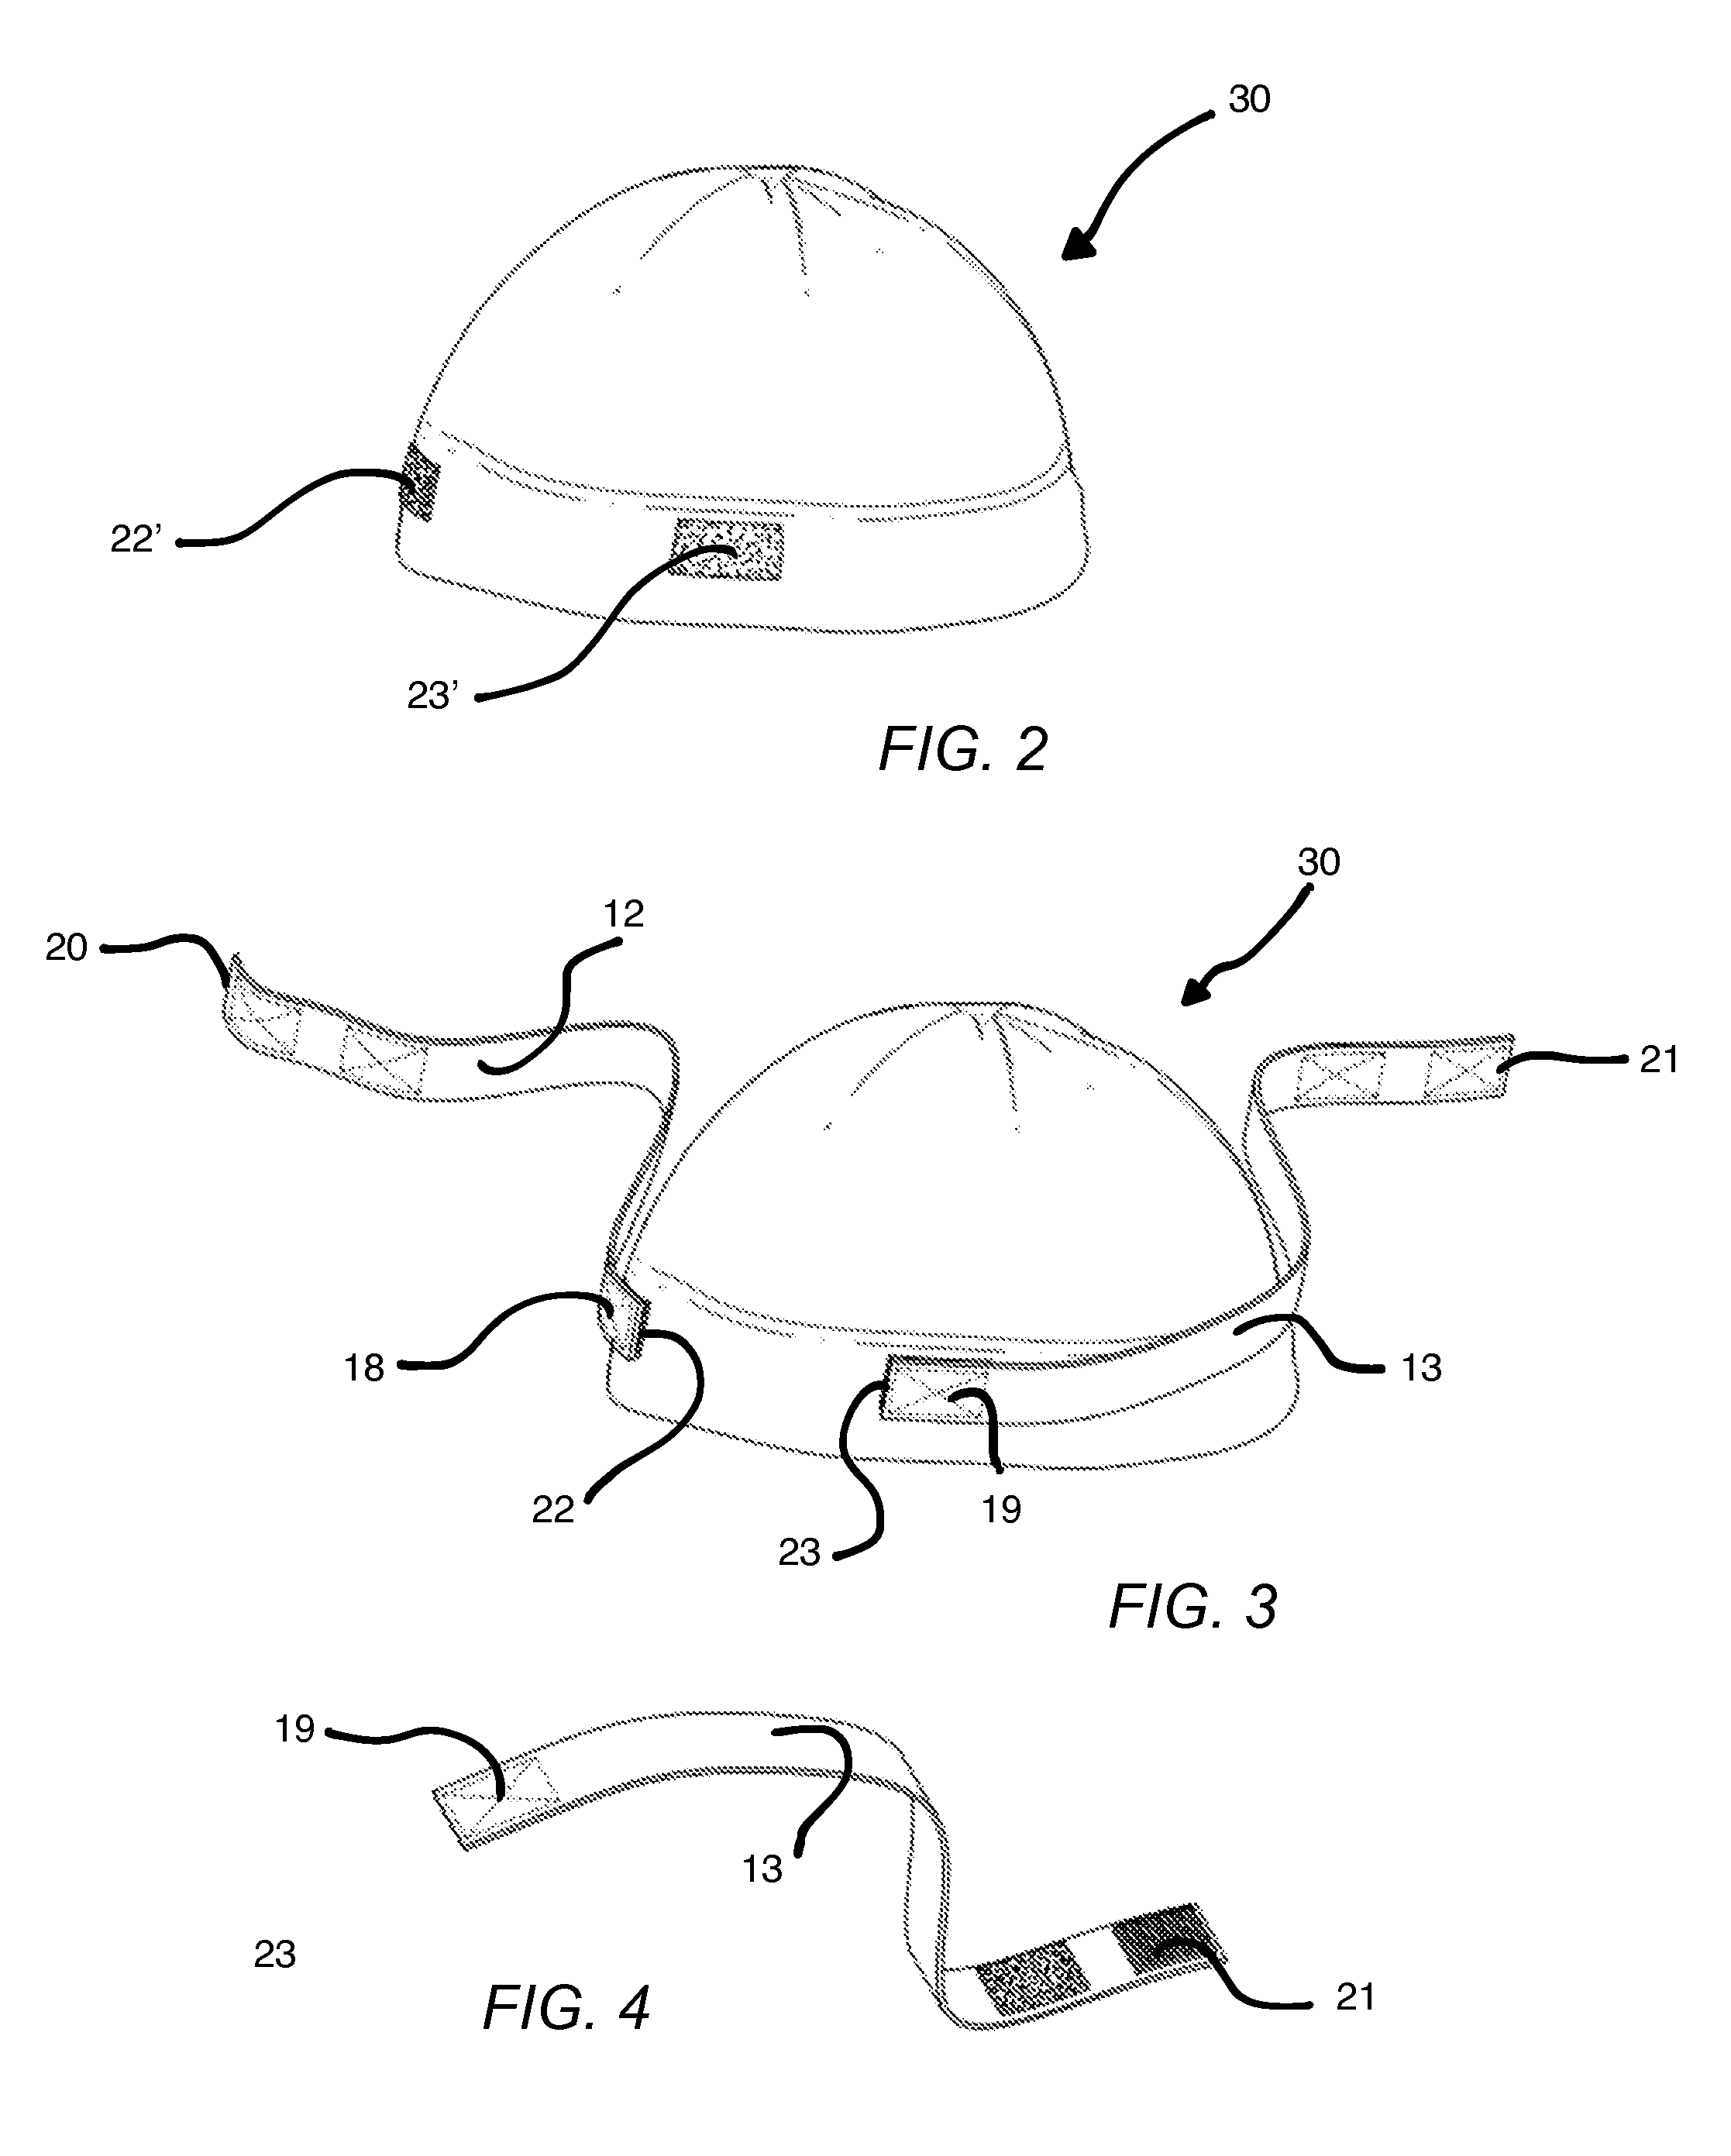 Head and Neck Support Apparatus